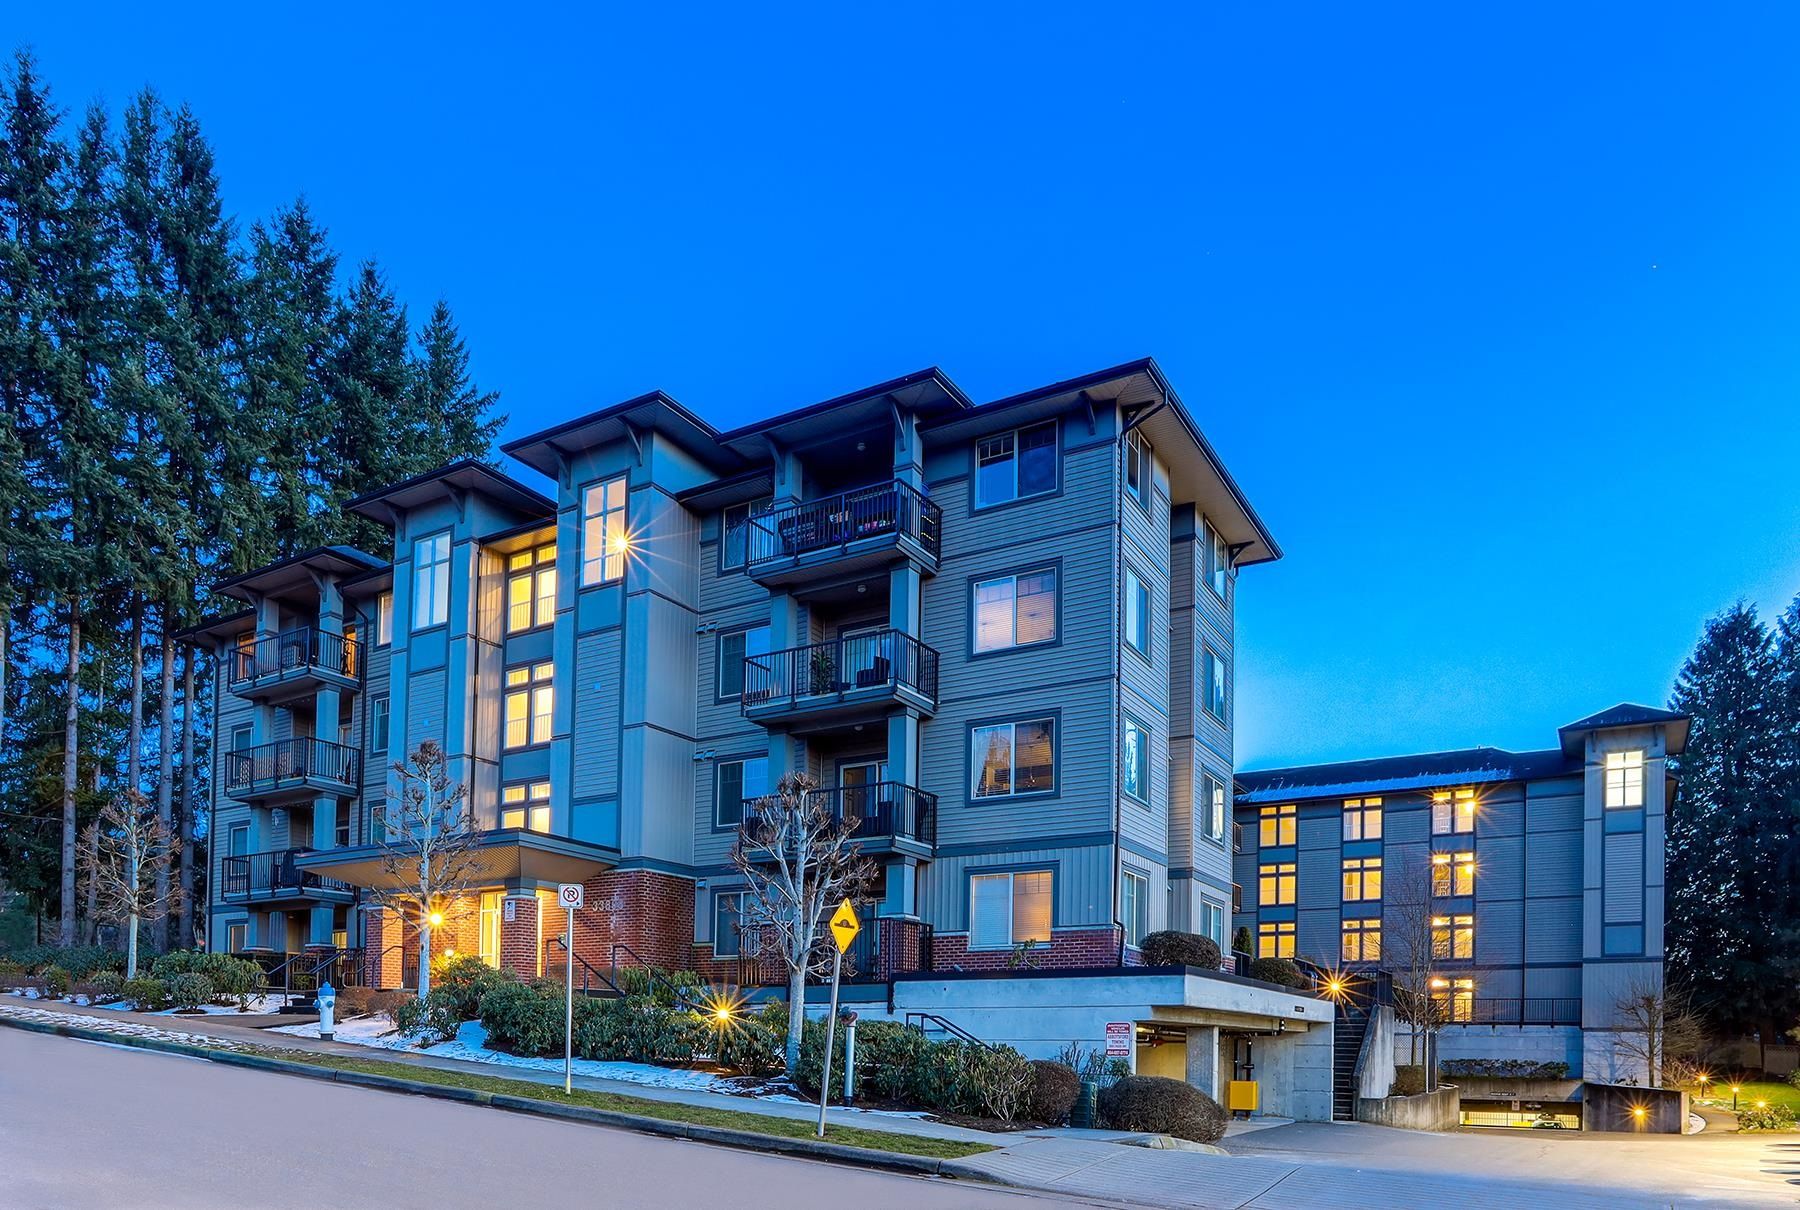 Main Photo: 204 33898 PINE STREET in : Central Abbotsford Condo for sale : MLS®# R2657916